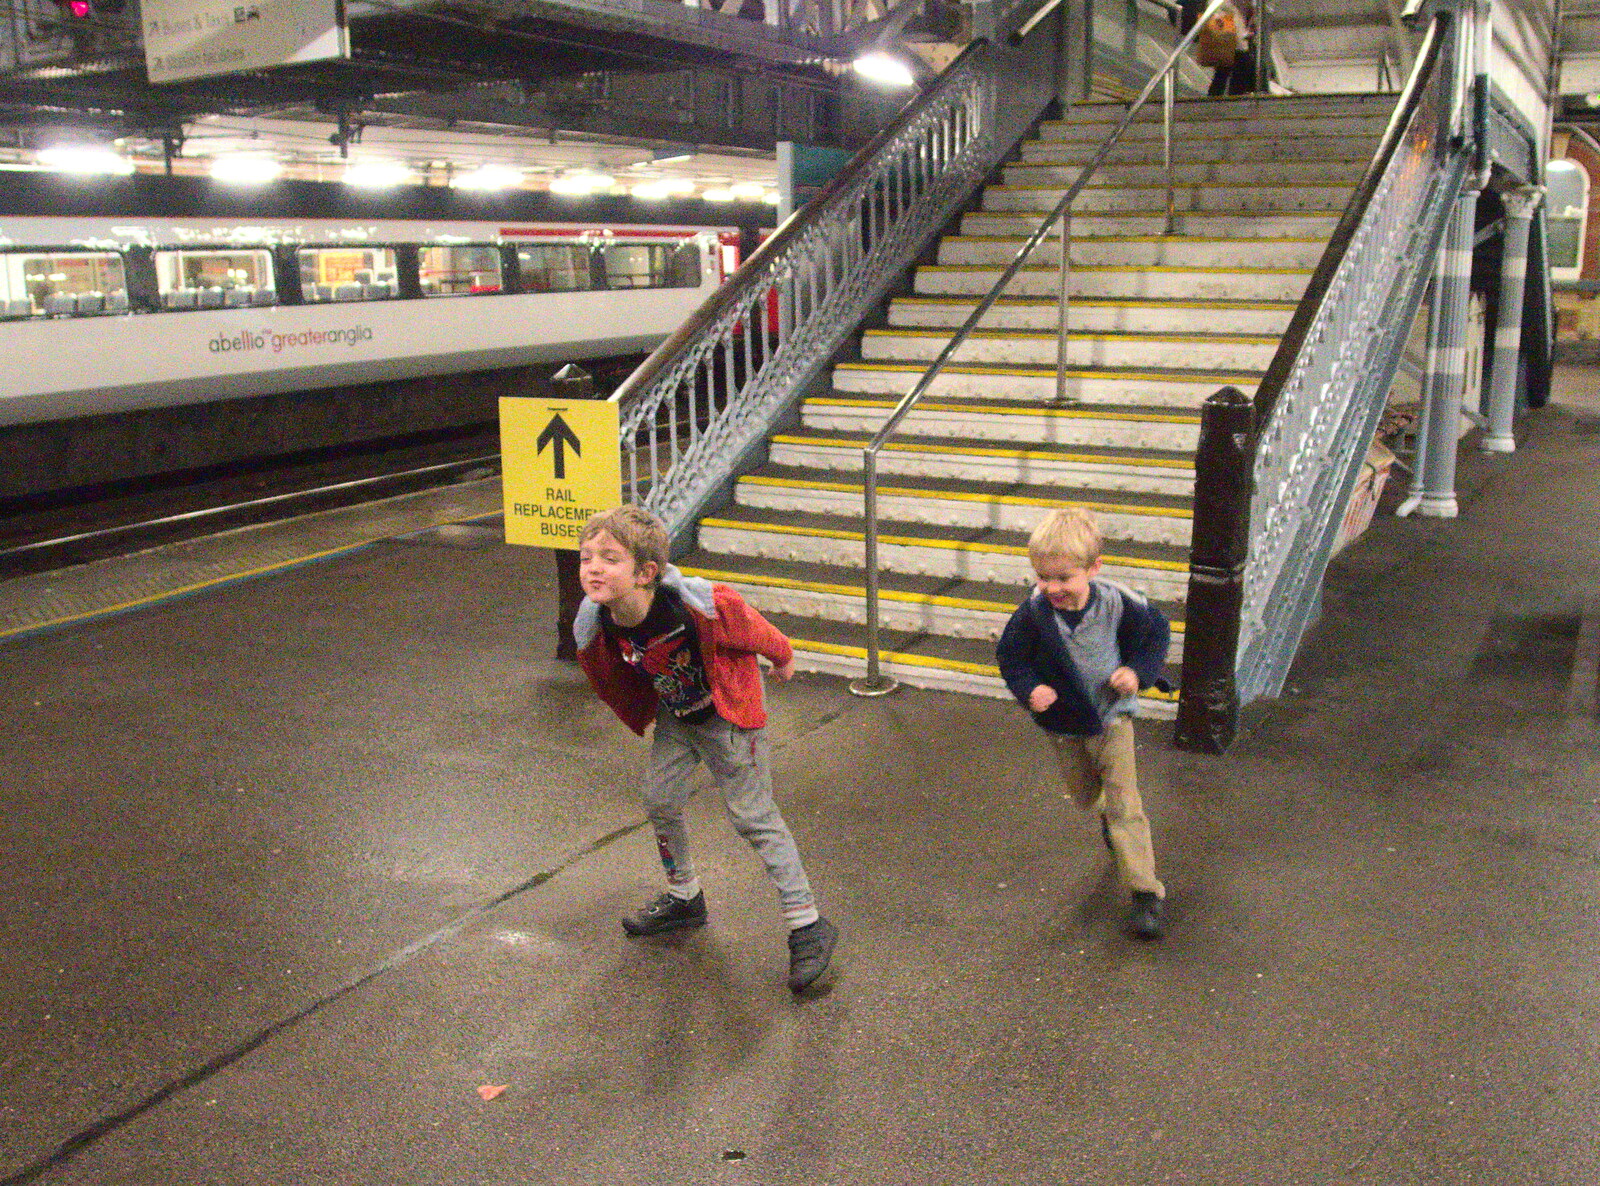 The boys run around on the platform from Isobel Goes to Lyon, Ipswich Station, Burrell Road - 24th January 2016